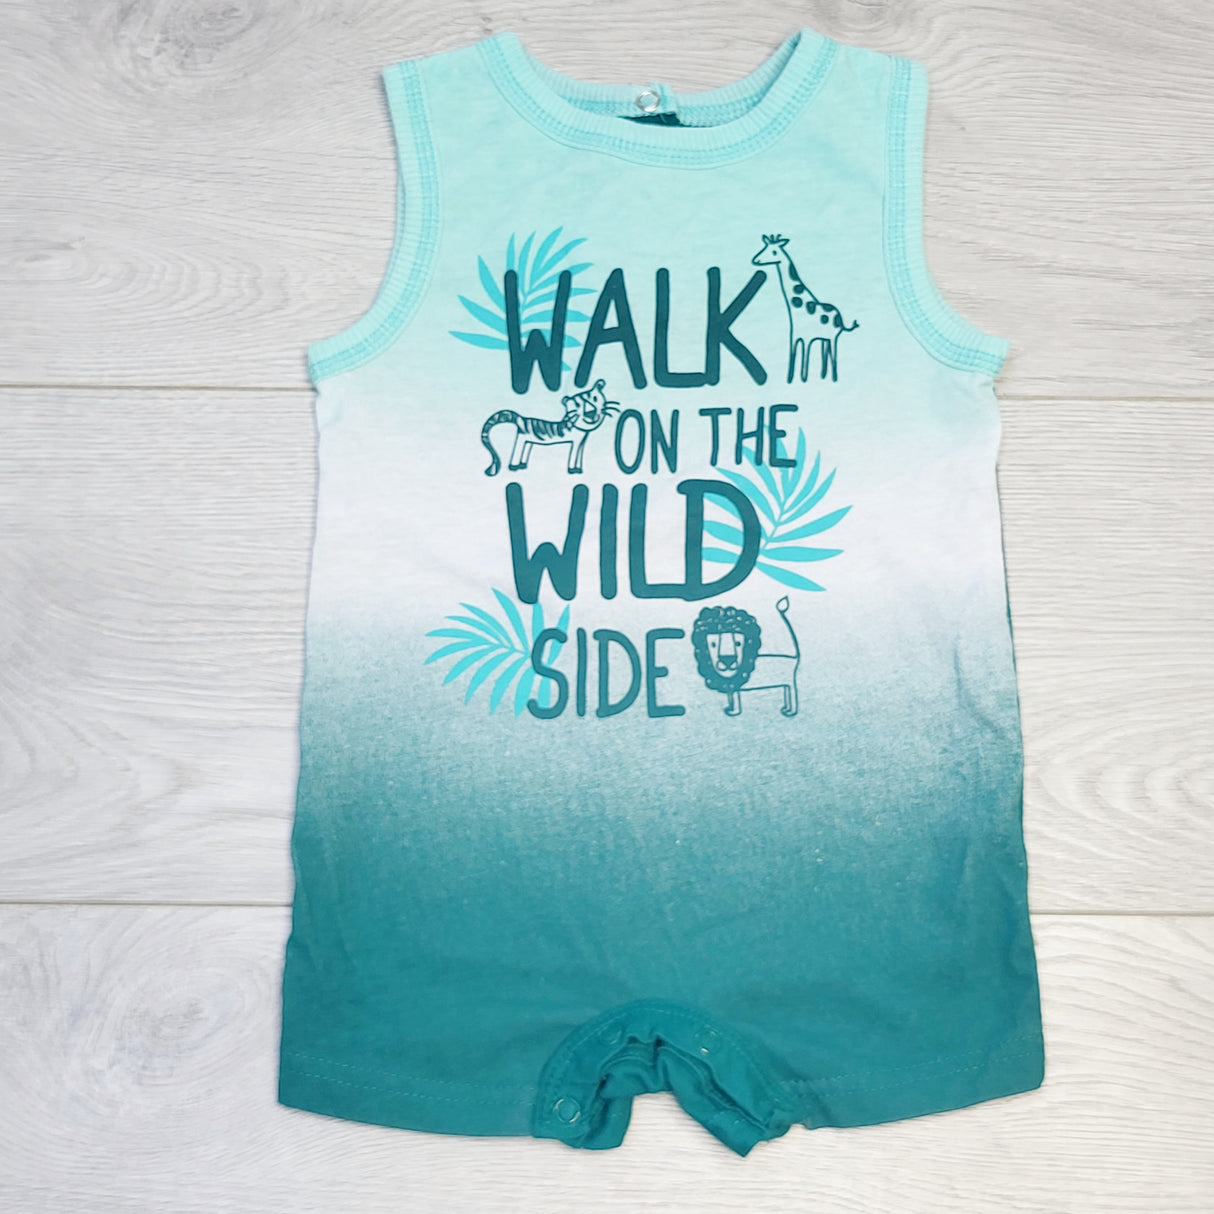 CHOL1 - George teal "Walk on the Wild Side" romper, size 6-12 months